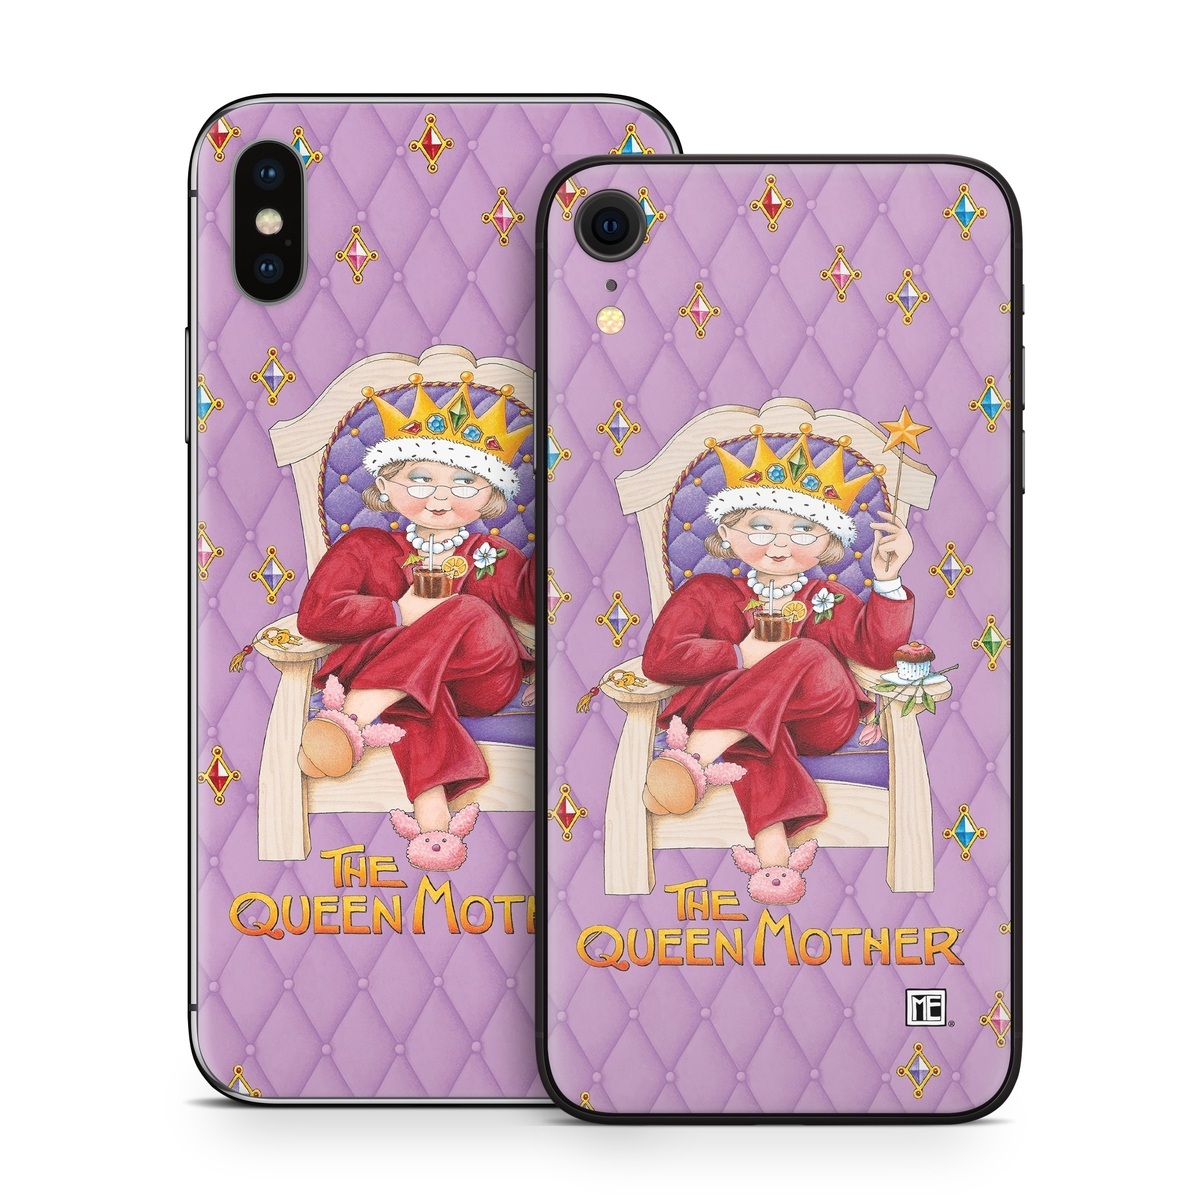 iPhone XS Skin design of Illustration, Art, Blessing, with gray, red, green, pink, purple, orange colors